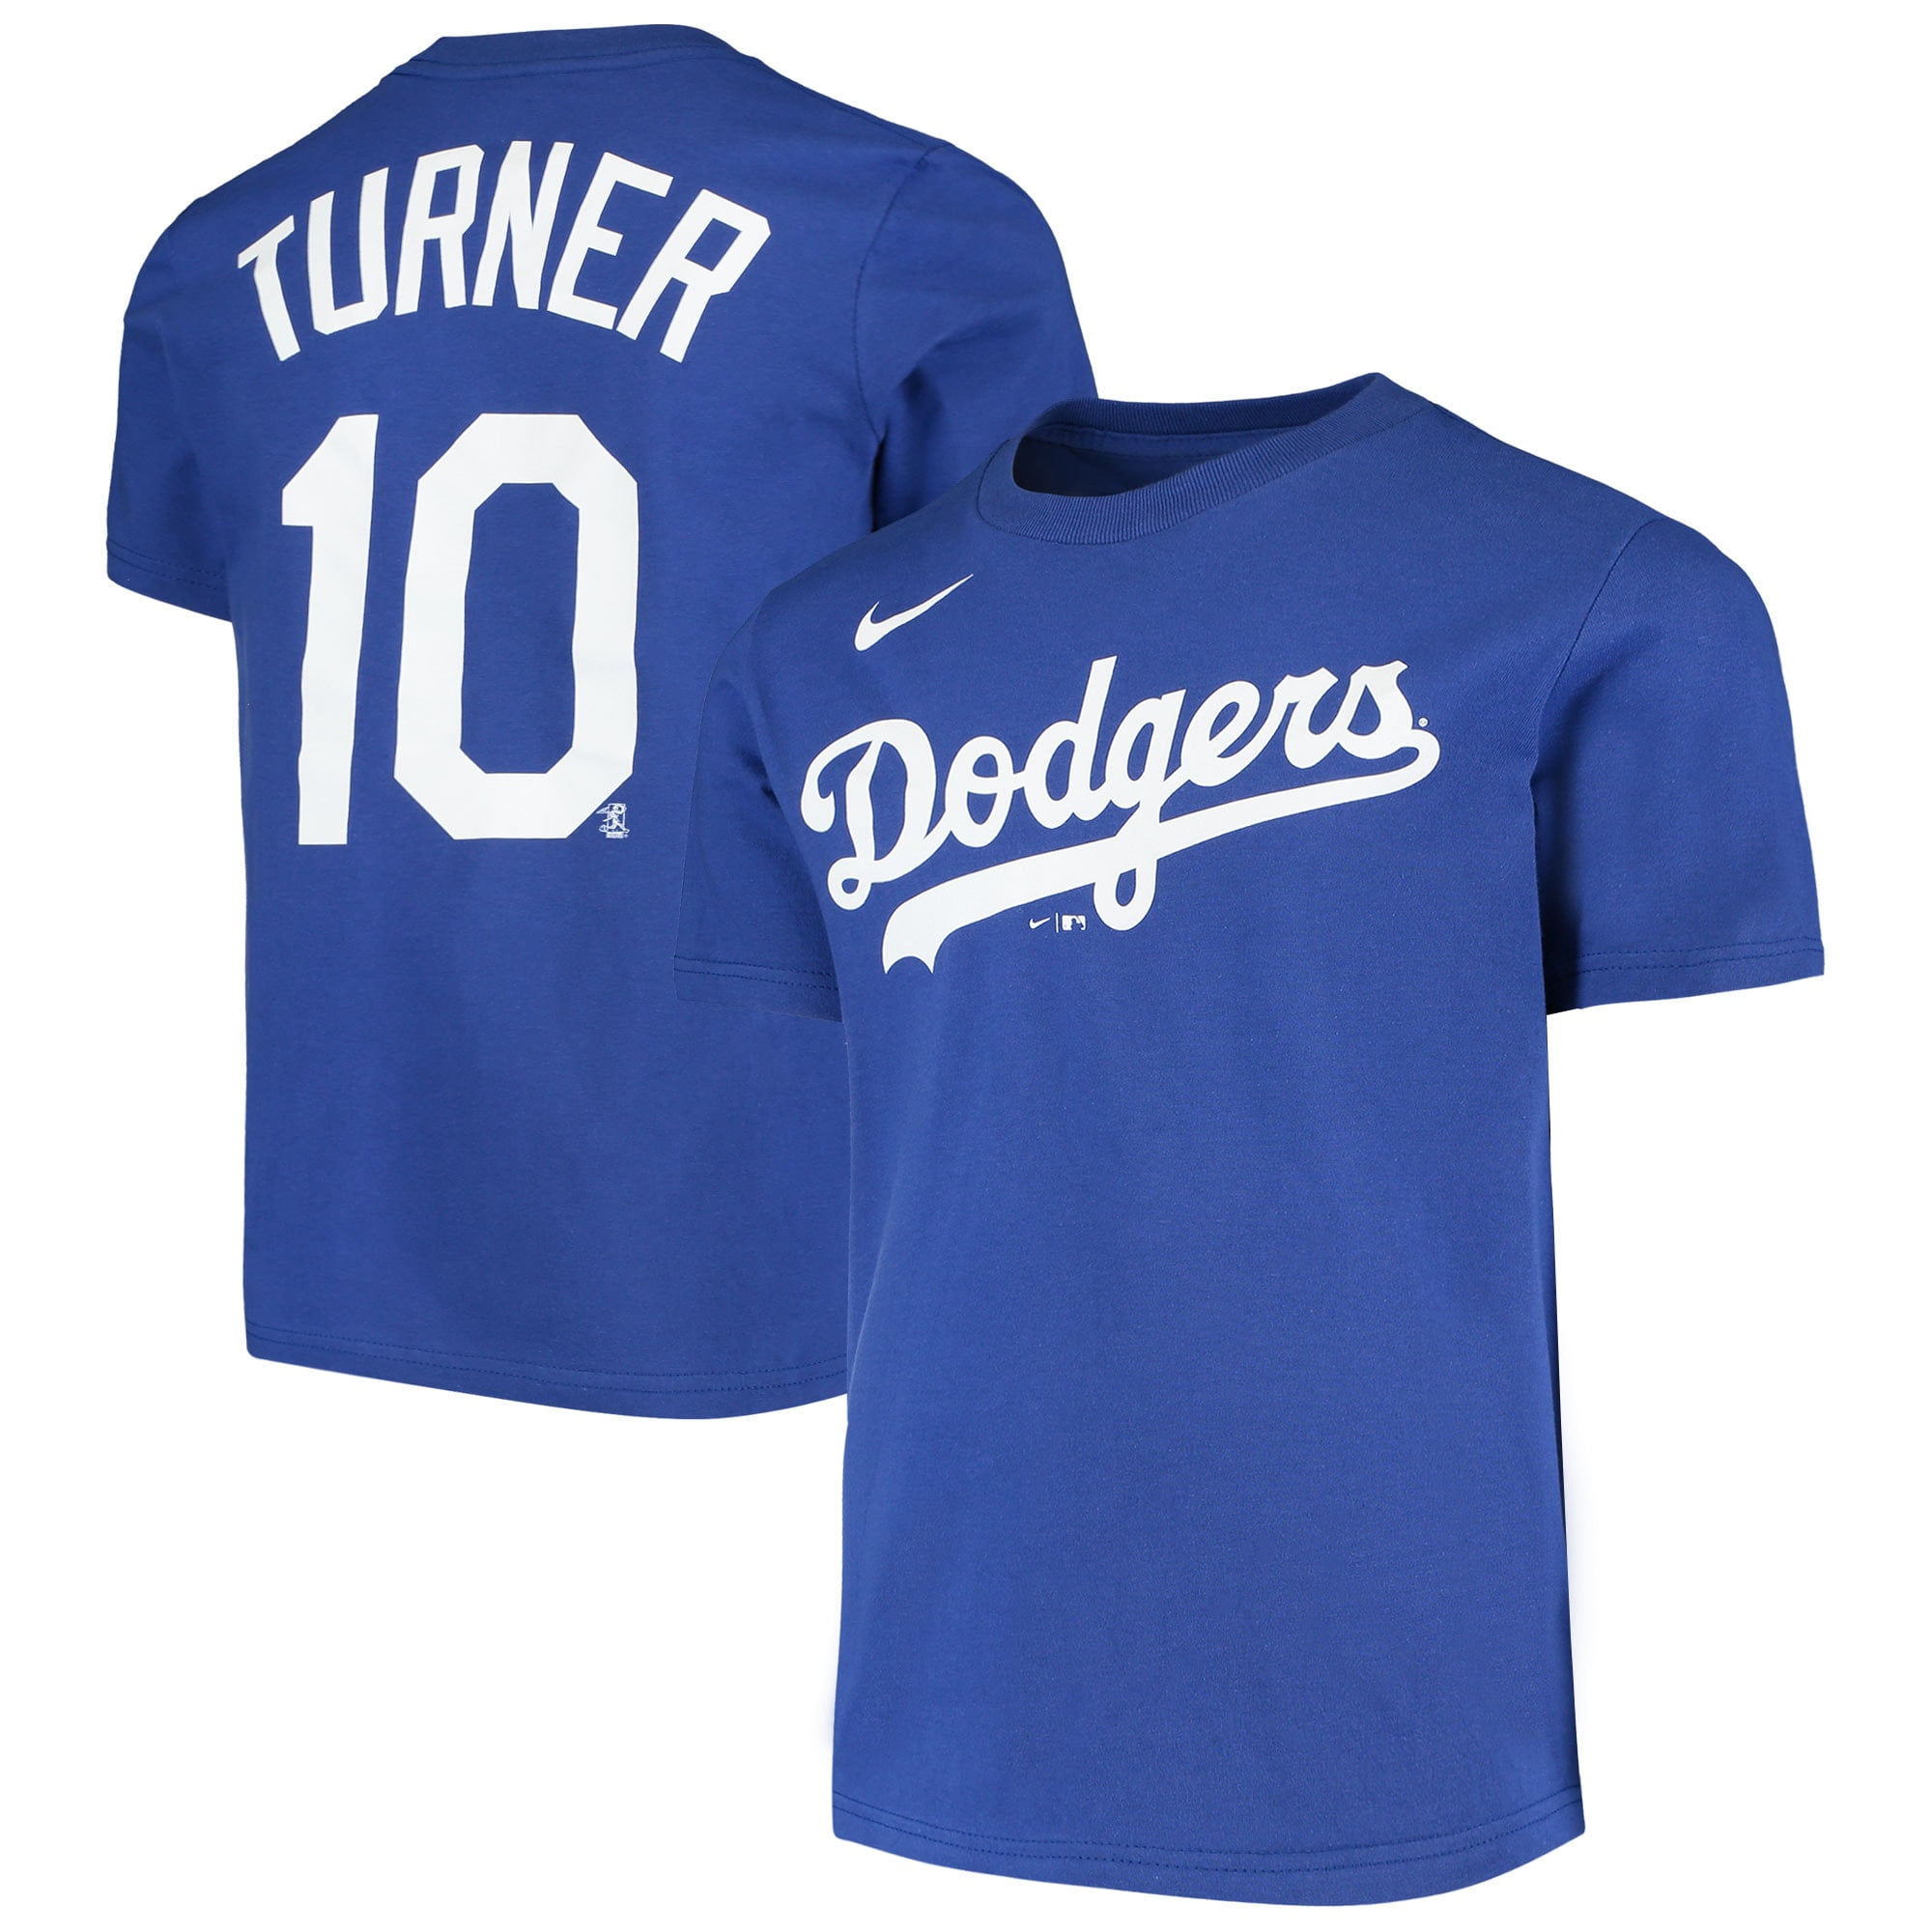 justin turner jersey youth